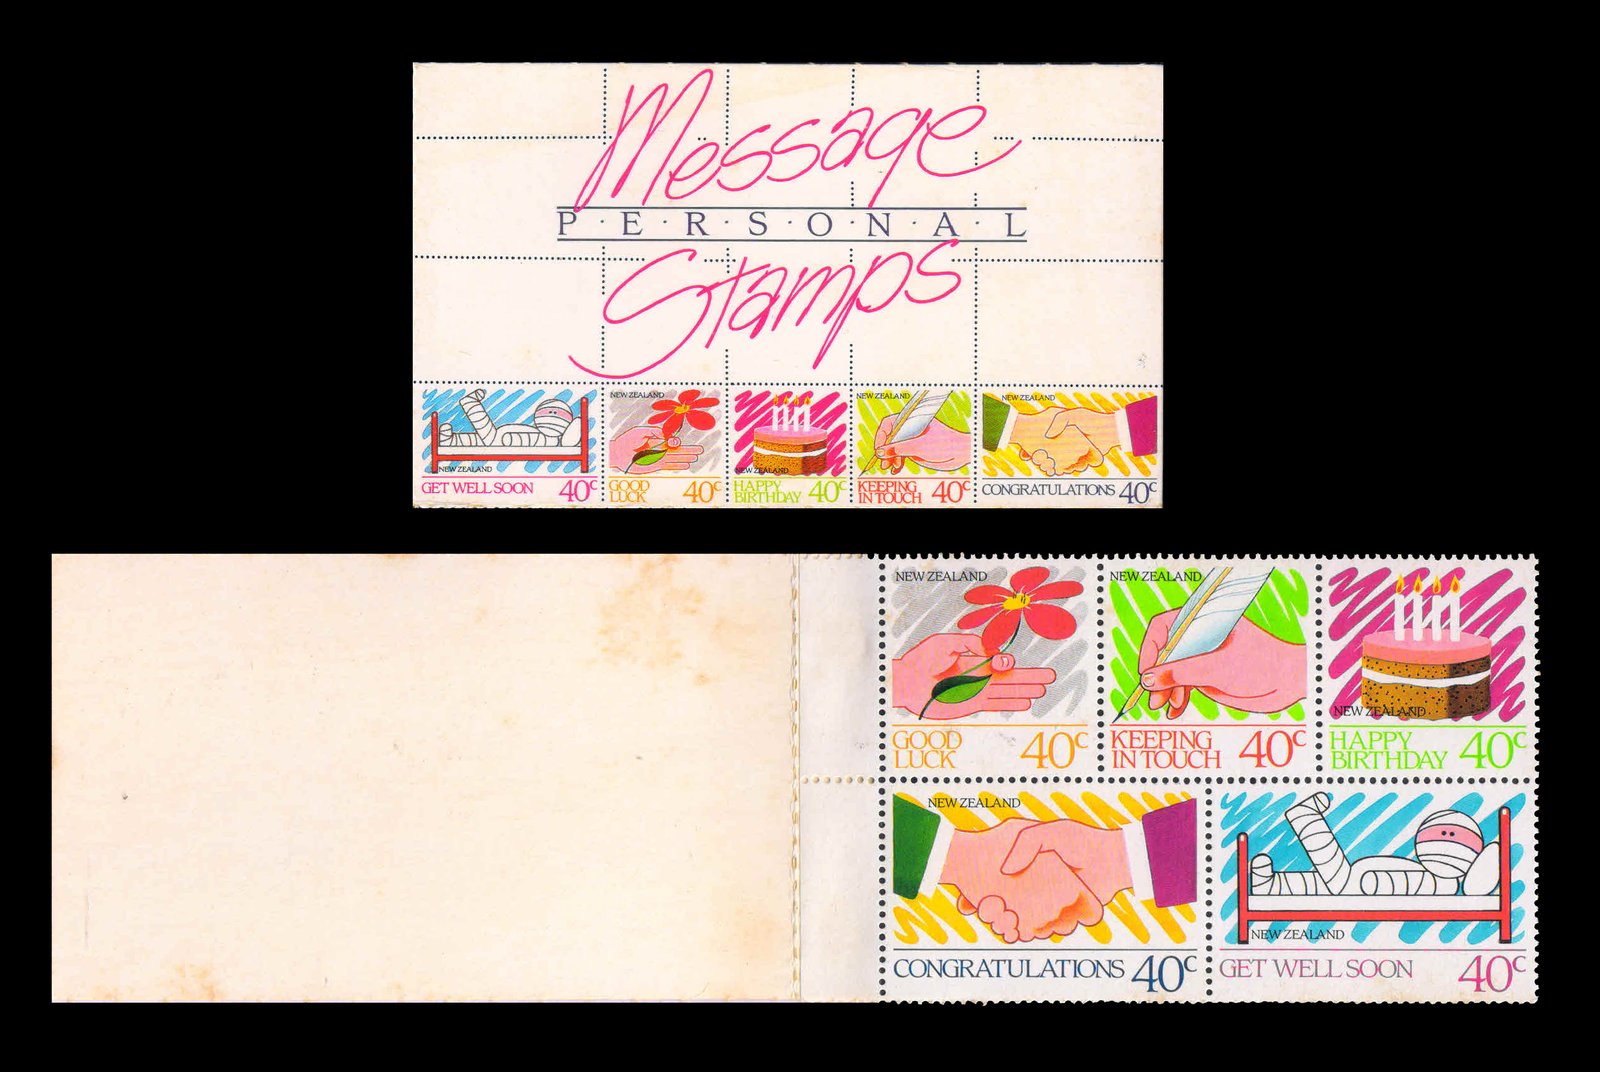 NEW ZEALAND 1988 - Greetings Stamps, Set of 5 Stamp, Booklet, MNH, S.G. 1455-1459, Cat. £ 3.50